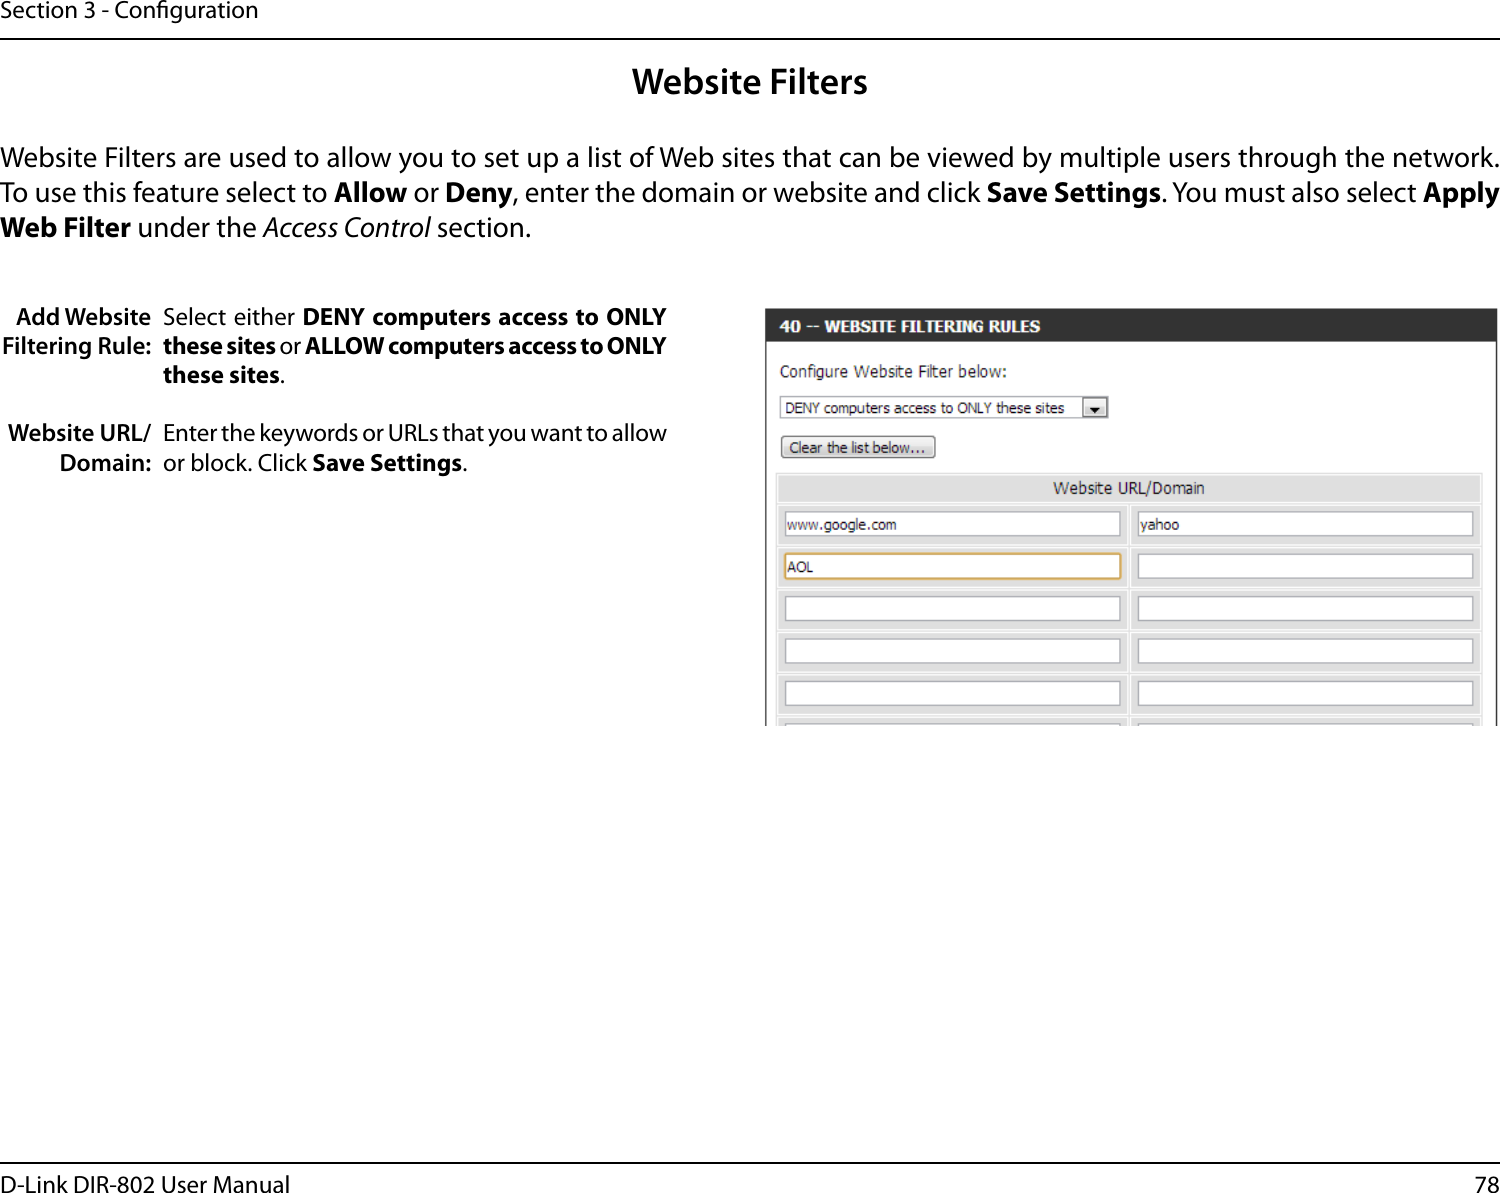 78D-Link DIR-802 User ManualSection 3 - CongurationAdd Website Filtering Rule:Website URL/Domain:Website FiltersSelect either DENY computers access to ONLY these sites or ALLOW computers access to ONLY these sites.Enter the keywords or URLs that you want to allow or block. Click Save Settings.Website Filters are used to allow you to set up a list of Web sites that can be viewed by multiple users through the network. To use this feature select to Allow or Deny, enter the domain or website and click Save Settings. You must also select Apply Web Filter under the Access Control section.